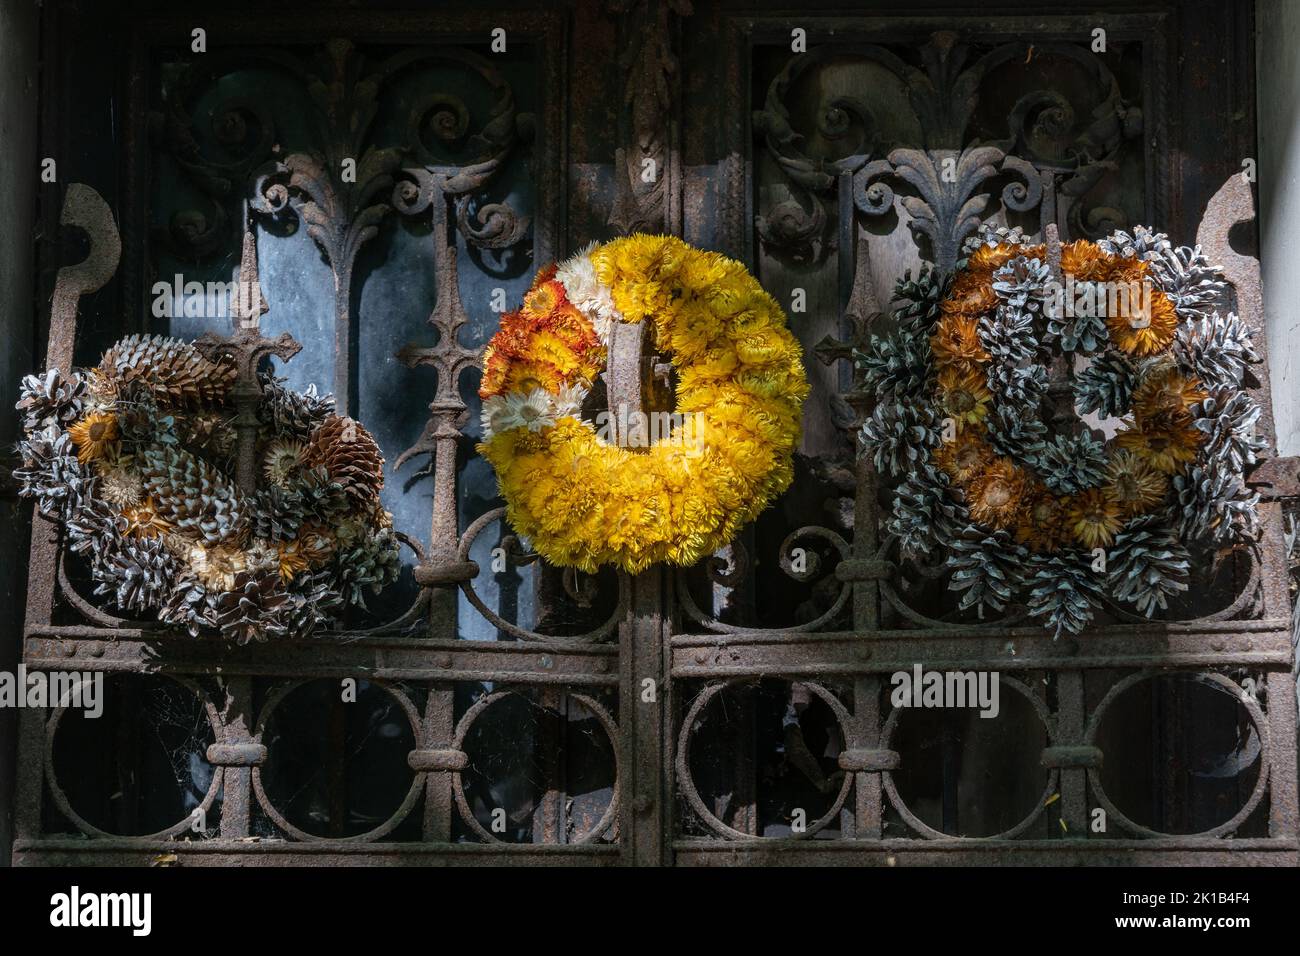 Old wreaths made from dry flowers and cones and put on tomb rusty metal gate in cemetery. Stock Photo